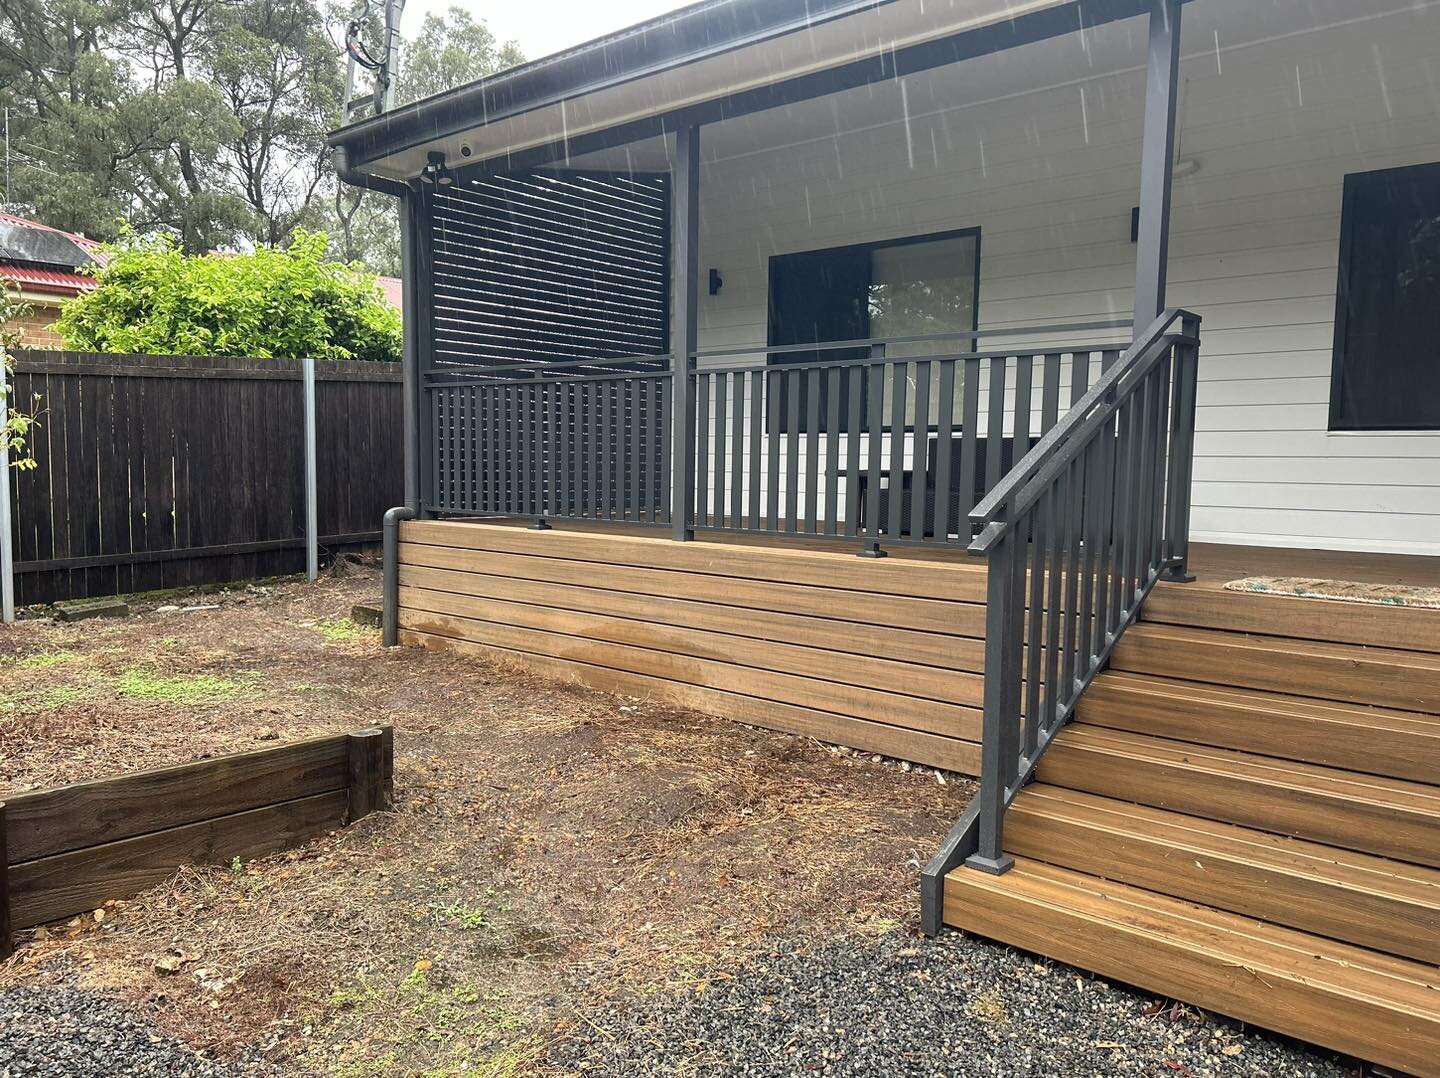 Put the final few balustrades in place on a local job for a lovely family. Monument 65x16mm custom balustrades made in house to compliment this amazing verandah as well as our custom made privacy screen. Super stoked with how this one turned out, loo